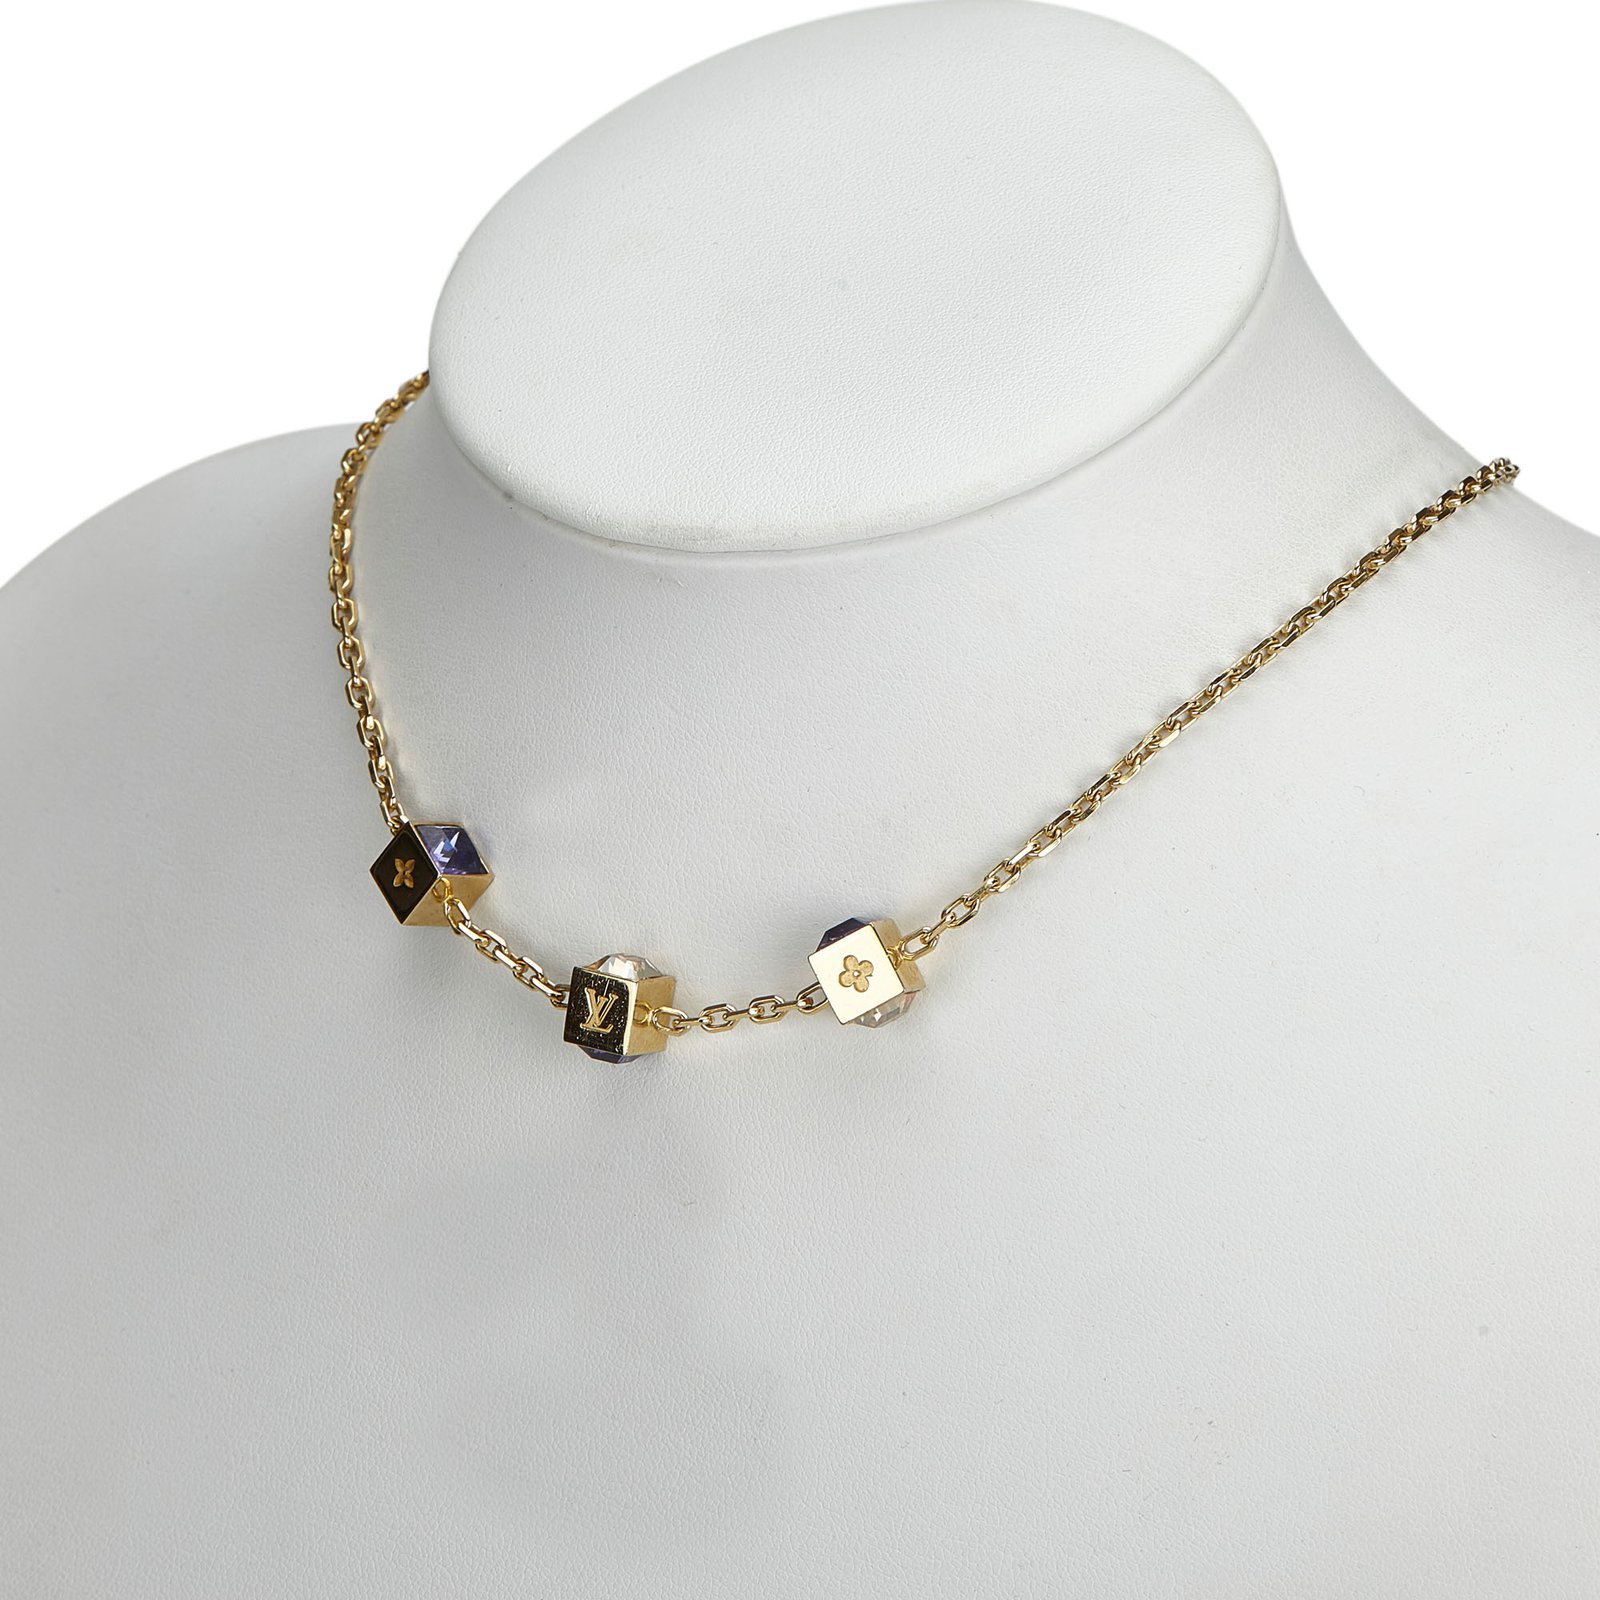 Louis Vuitton Cuban gold necklace - jewelry - by owner - sale - craigslist